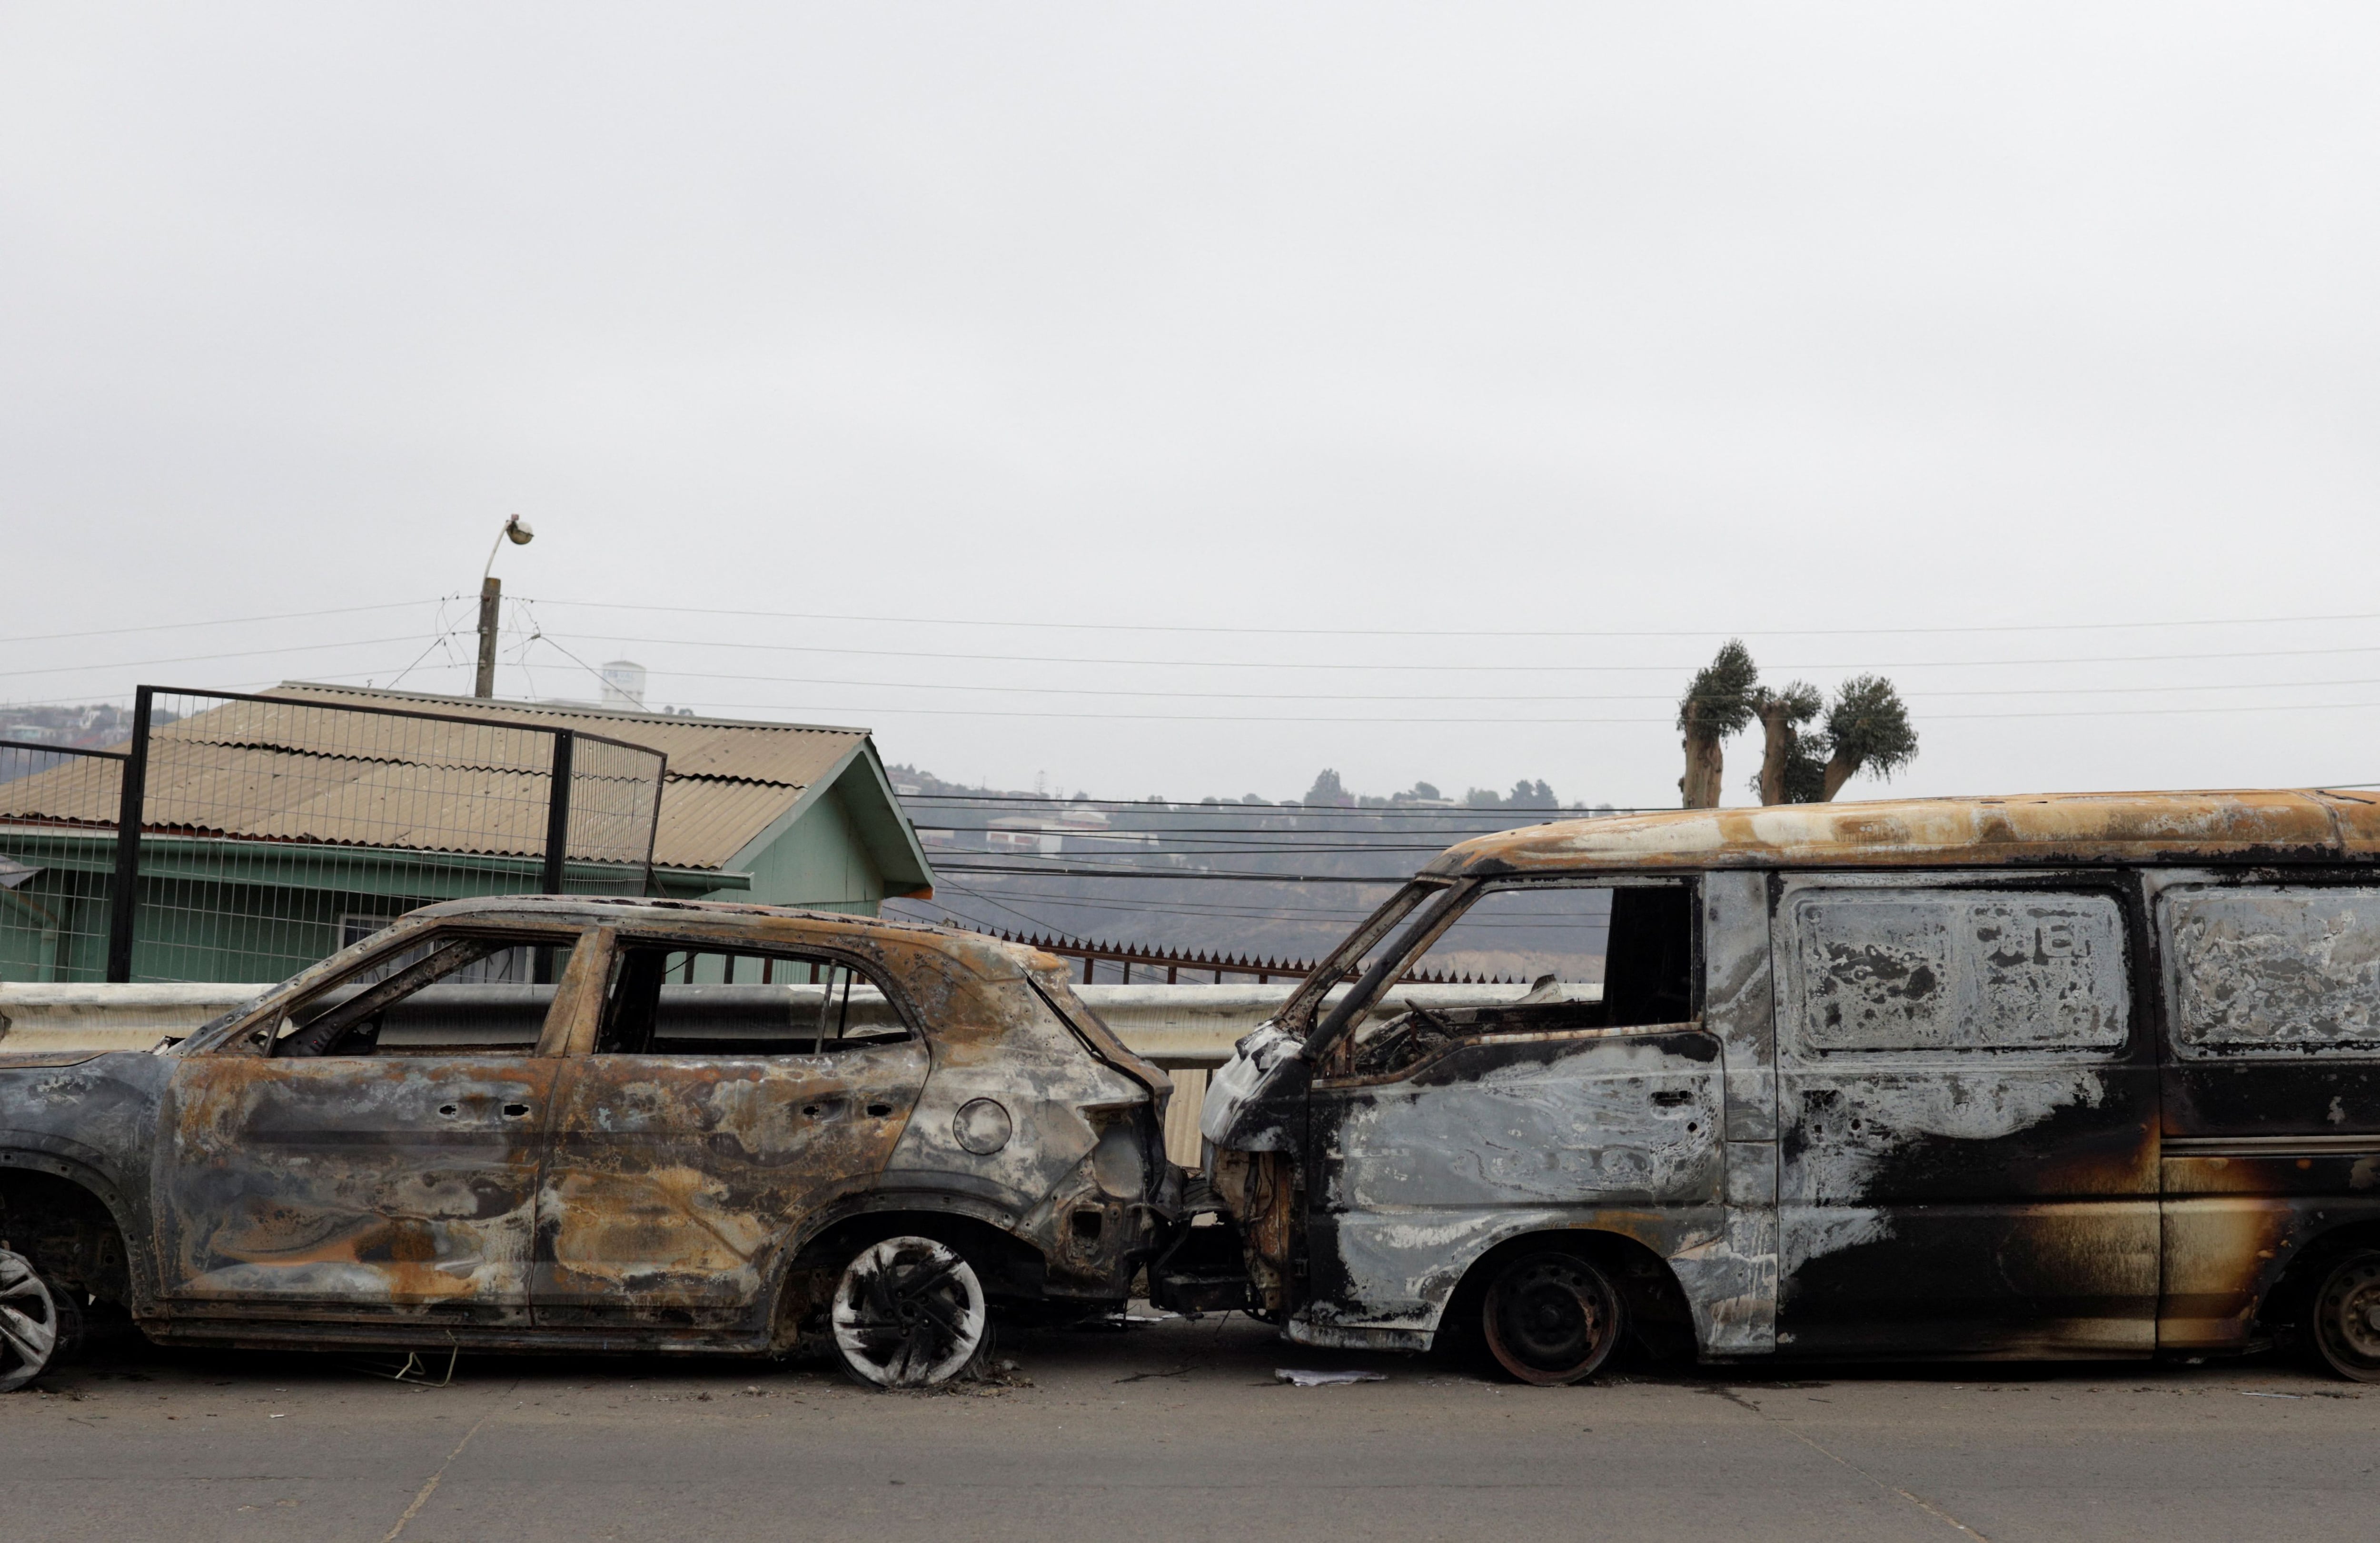 The charred remains of two cars on the side of a road on Sunday in Viña del Mar.